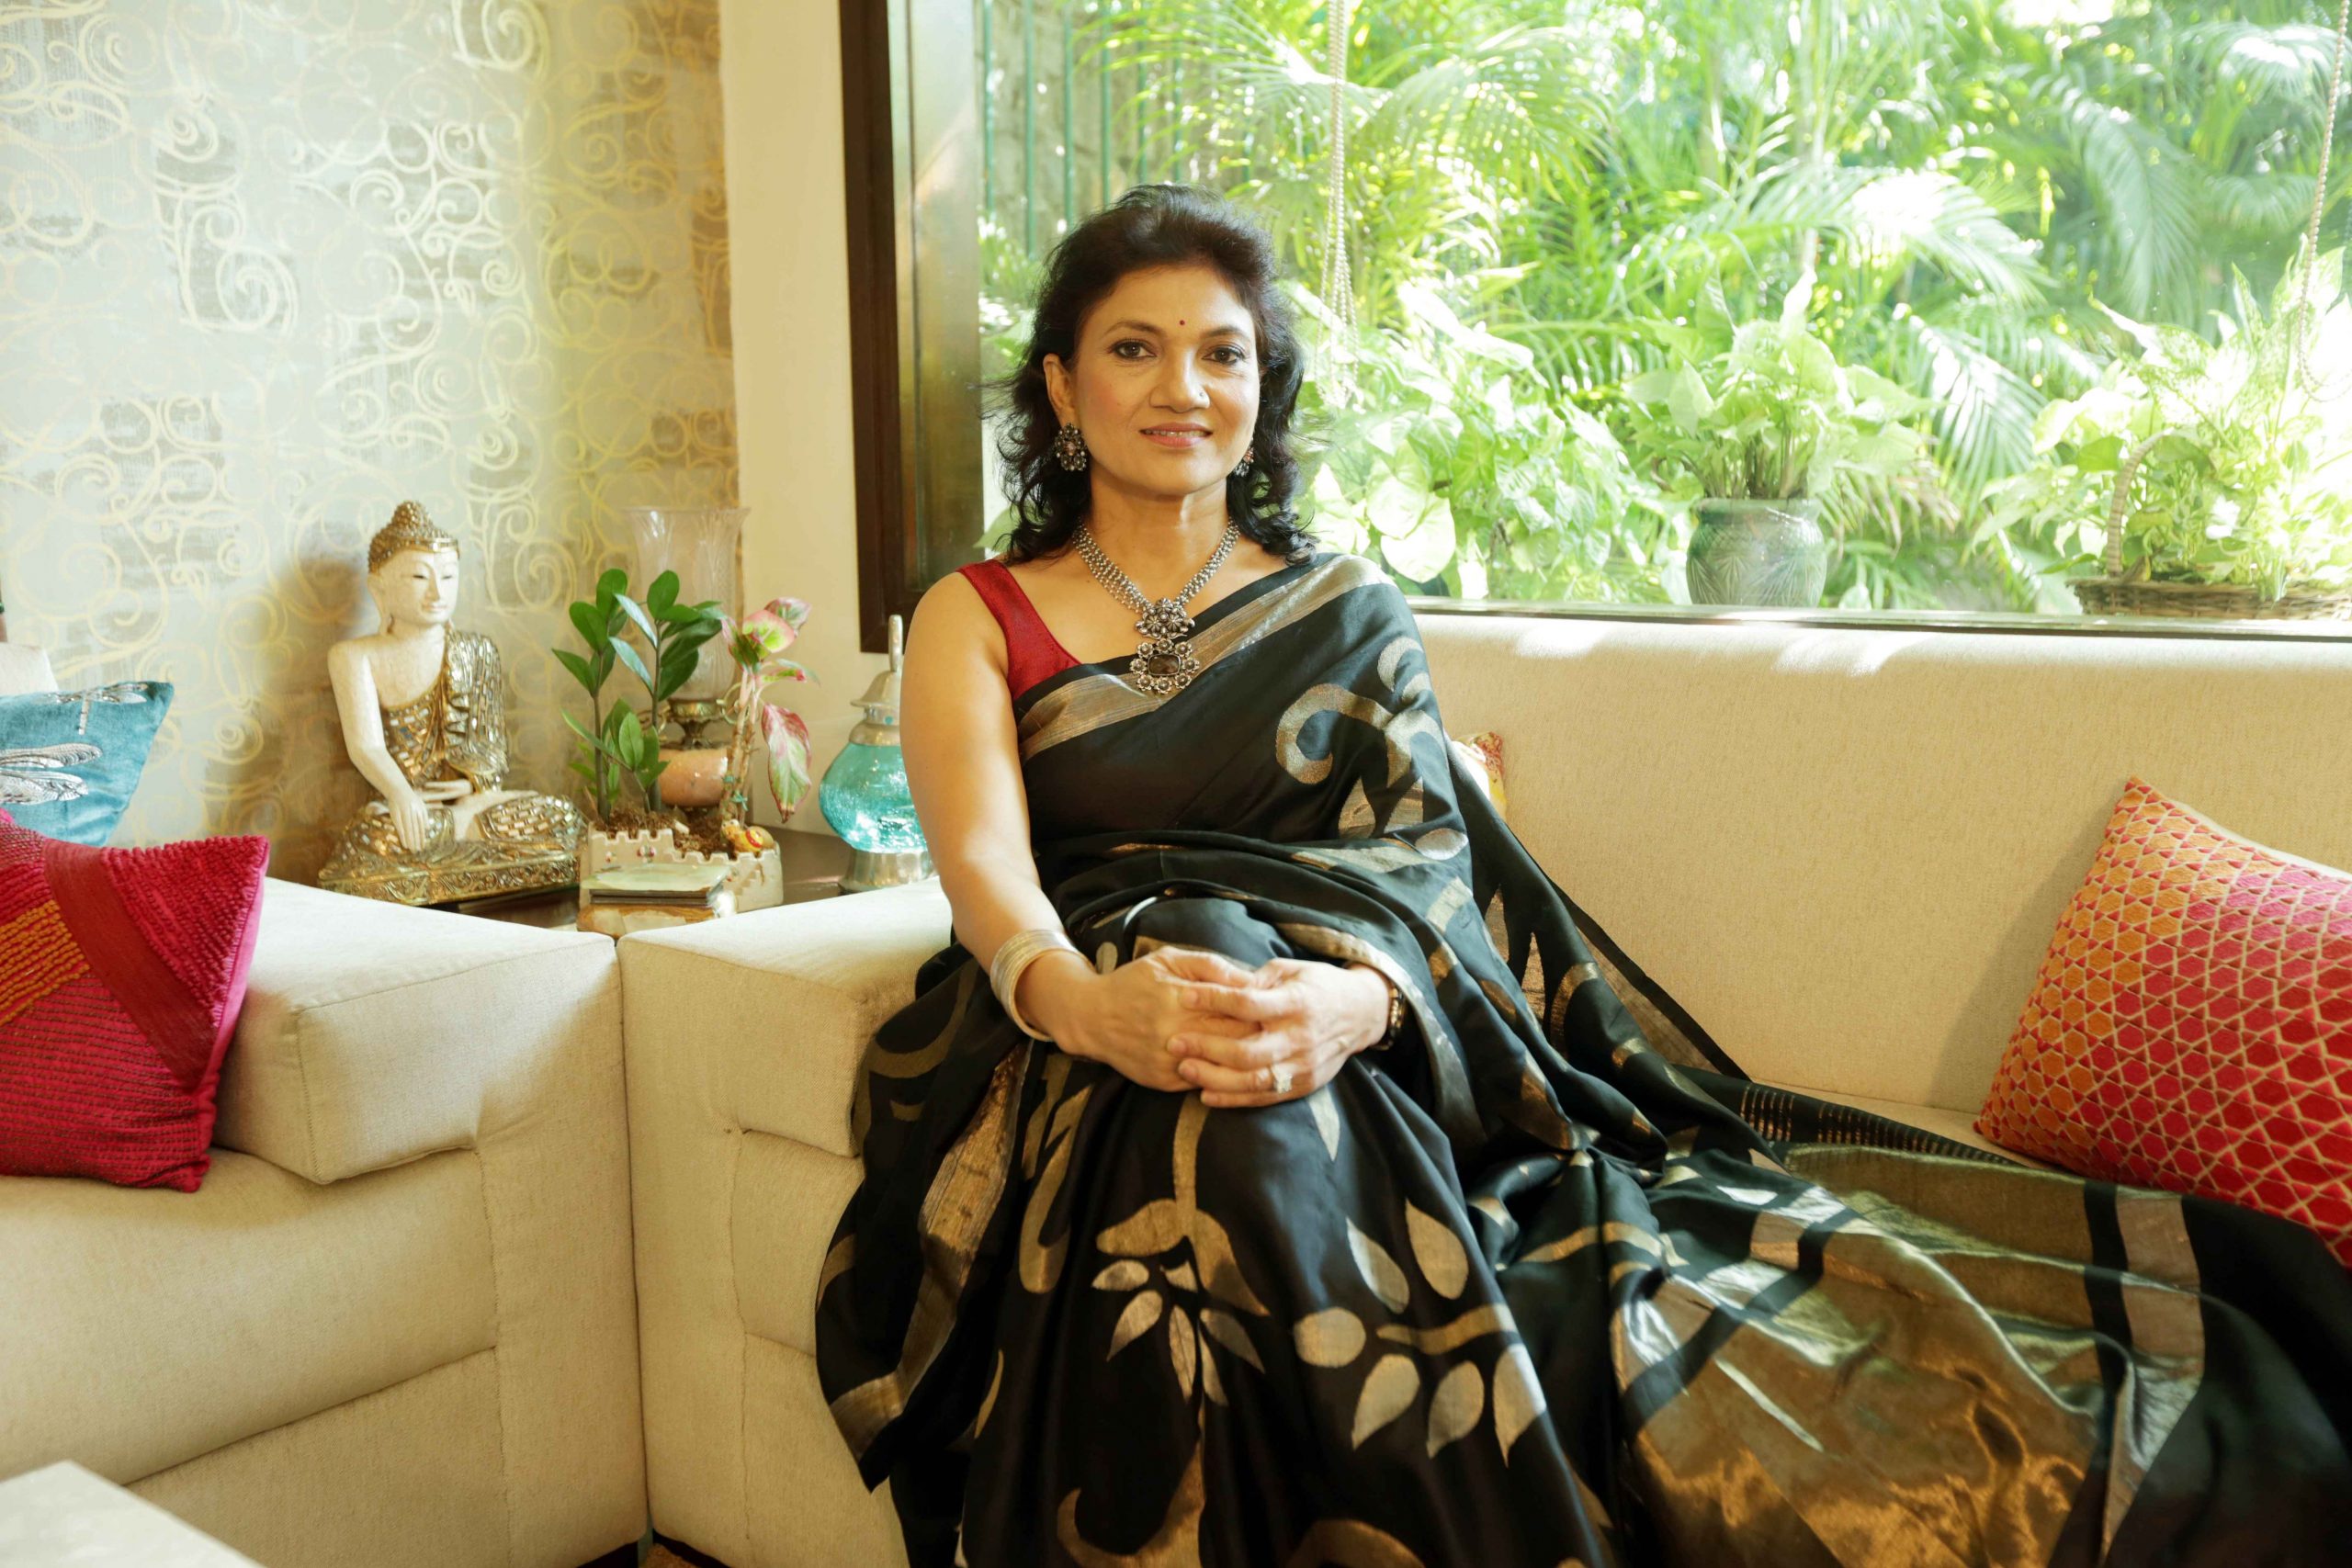 Housewife Started Career At 42 Now Has 25 Crore Turnover Multinational Corporate Contracts